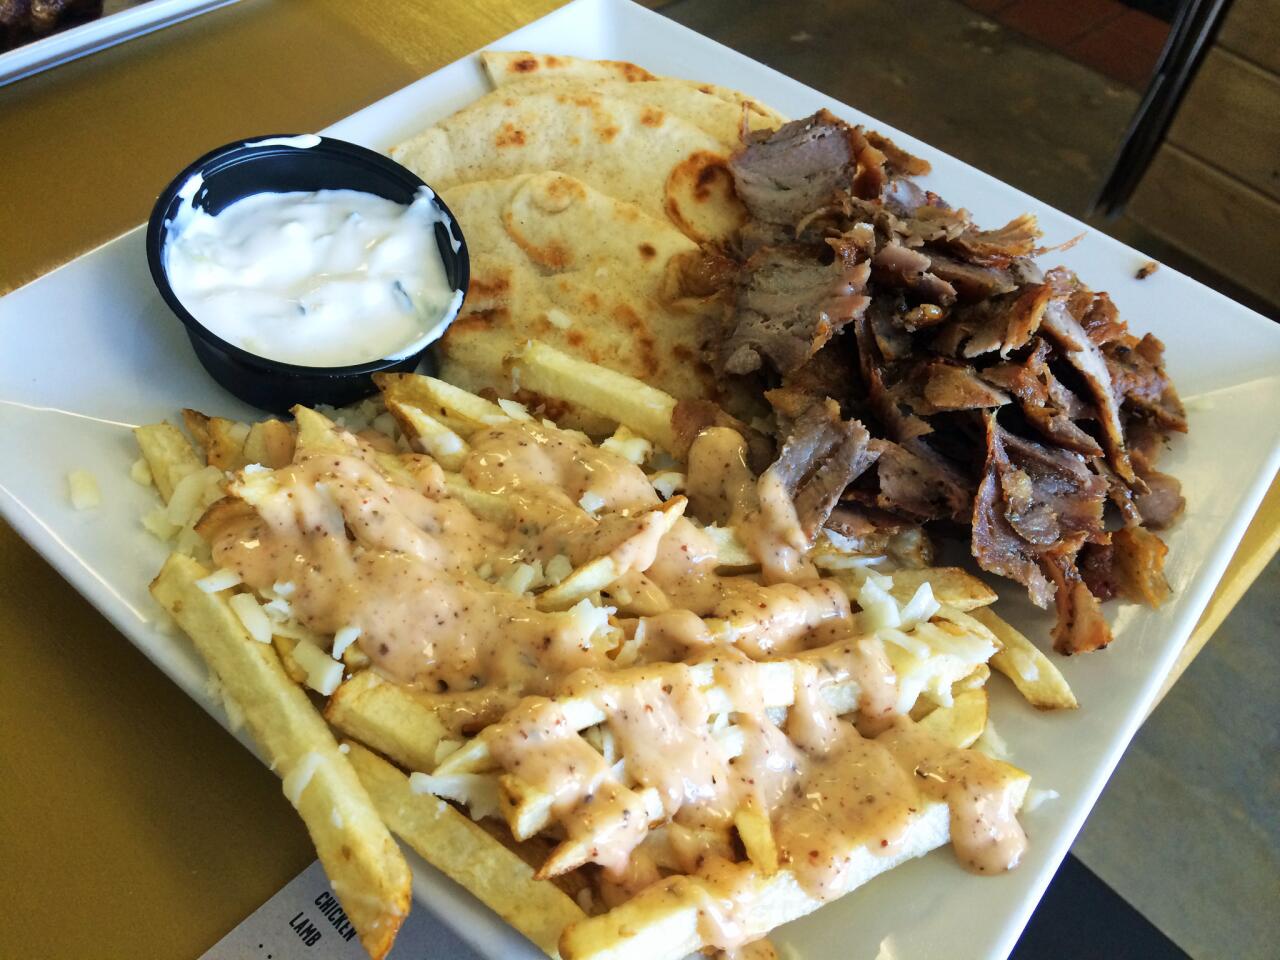 The pork gyro with Langonisi fries covered in a house sauce and Kefalograviera cheese.